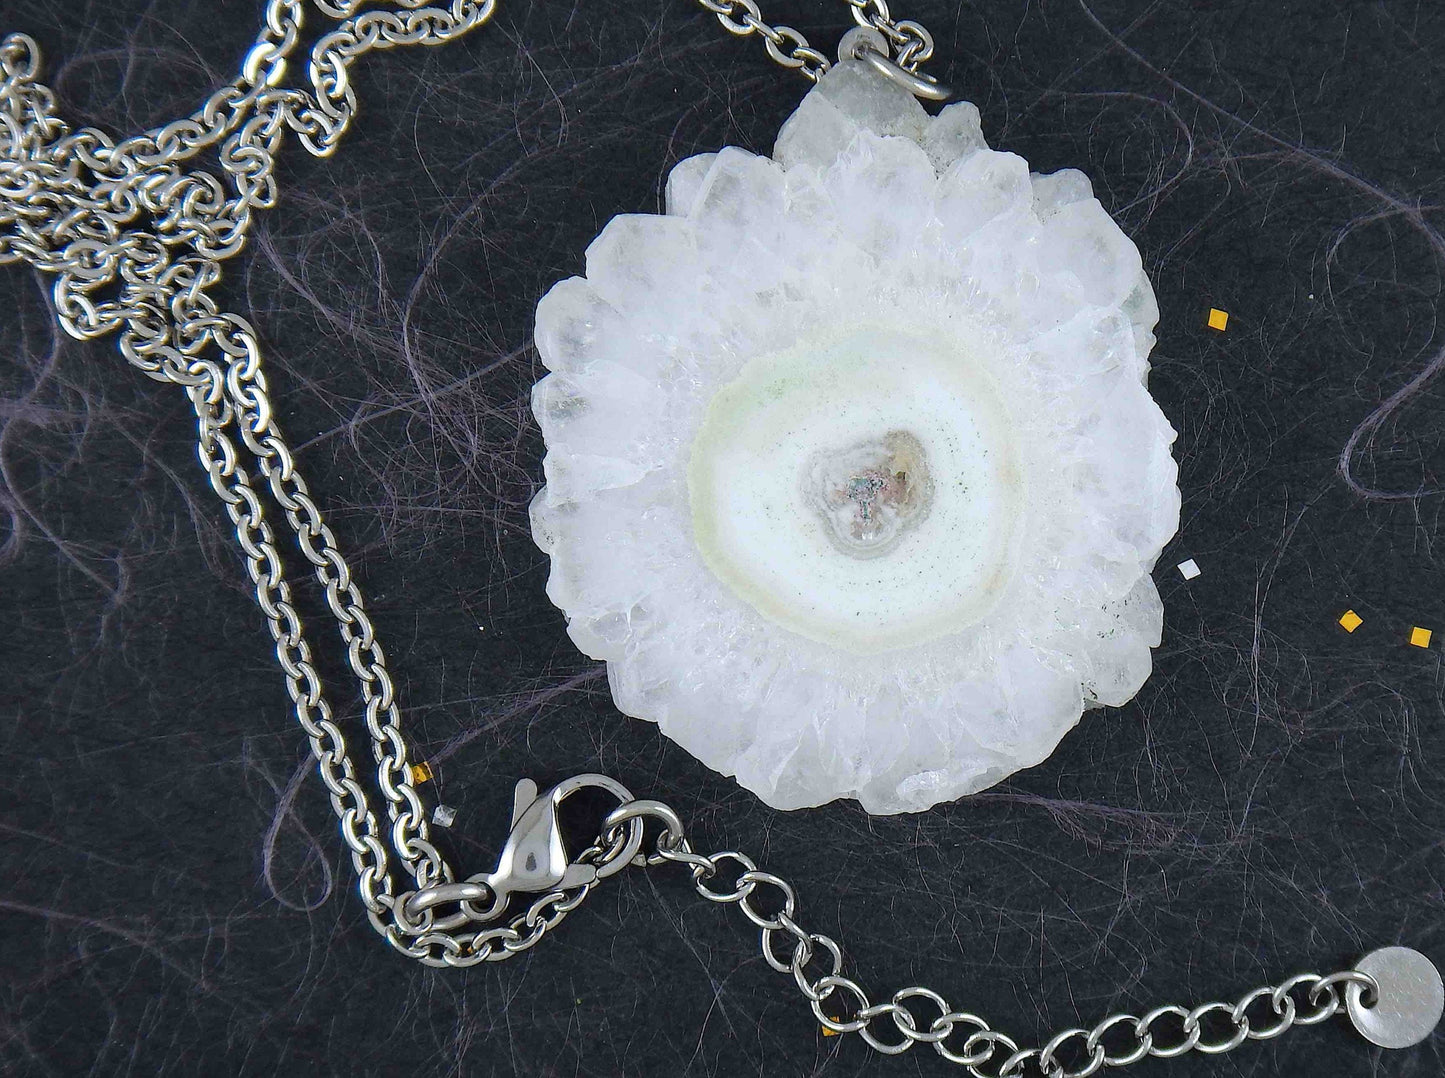 16-inch necklace with large solar quartz stone circular pendant, white with a hint of green, stainless steel chain